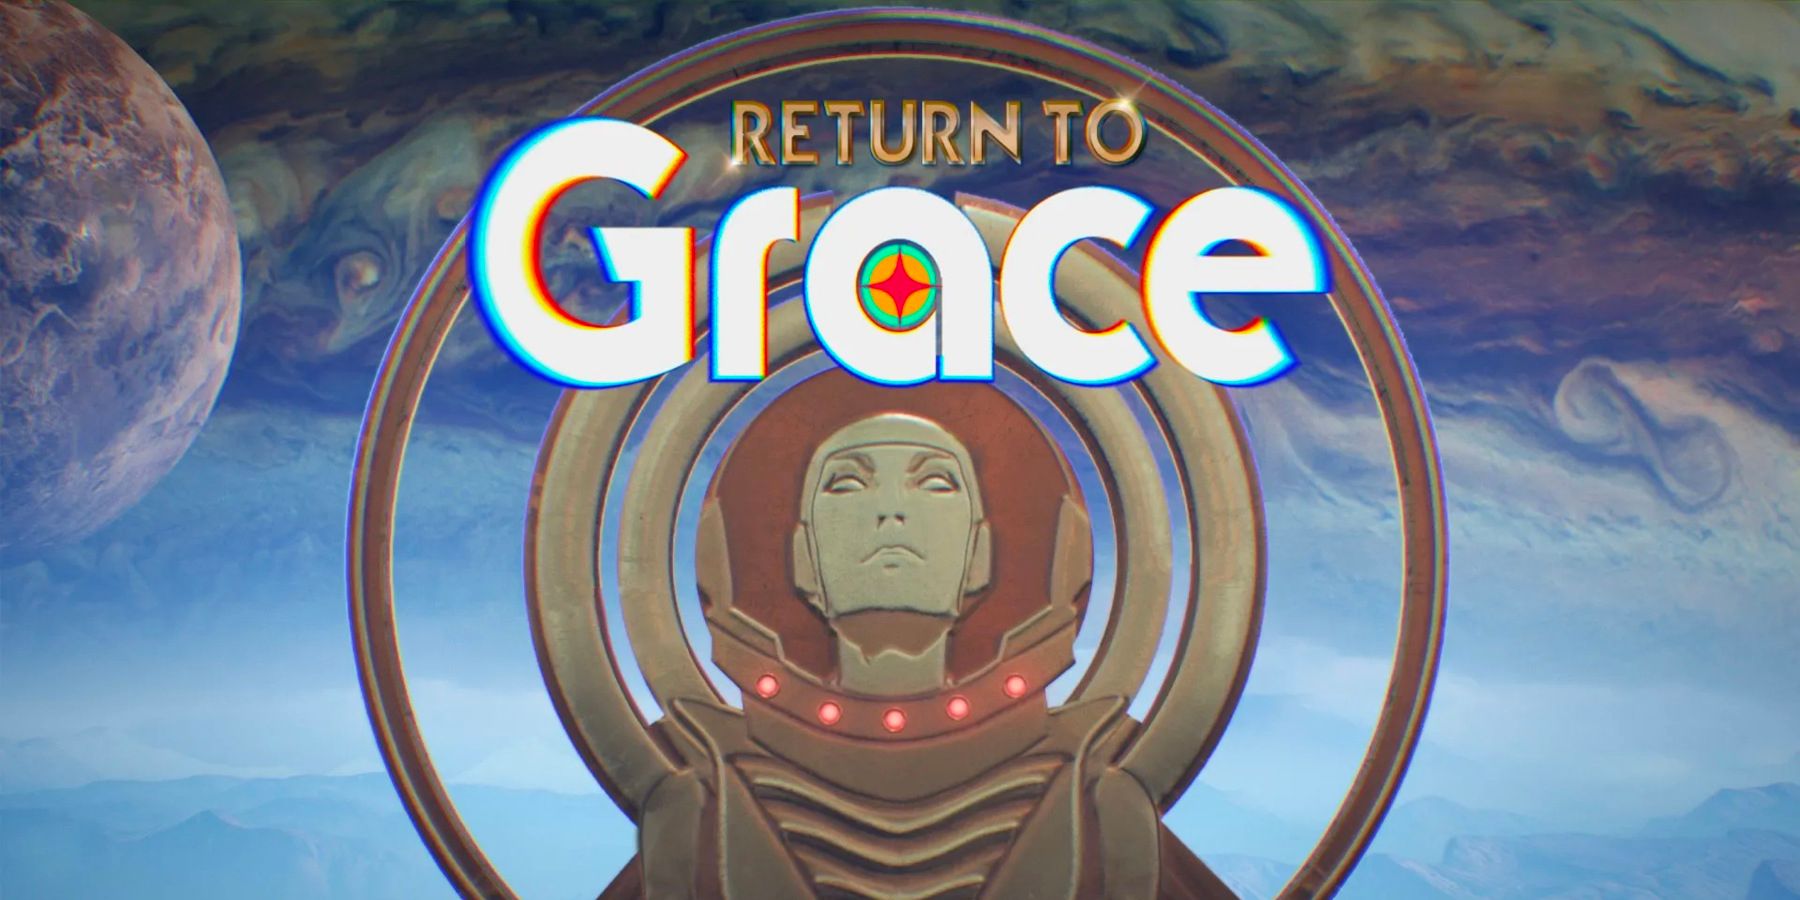 Artwork for the video game Return To Grace. Text reads